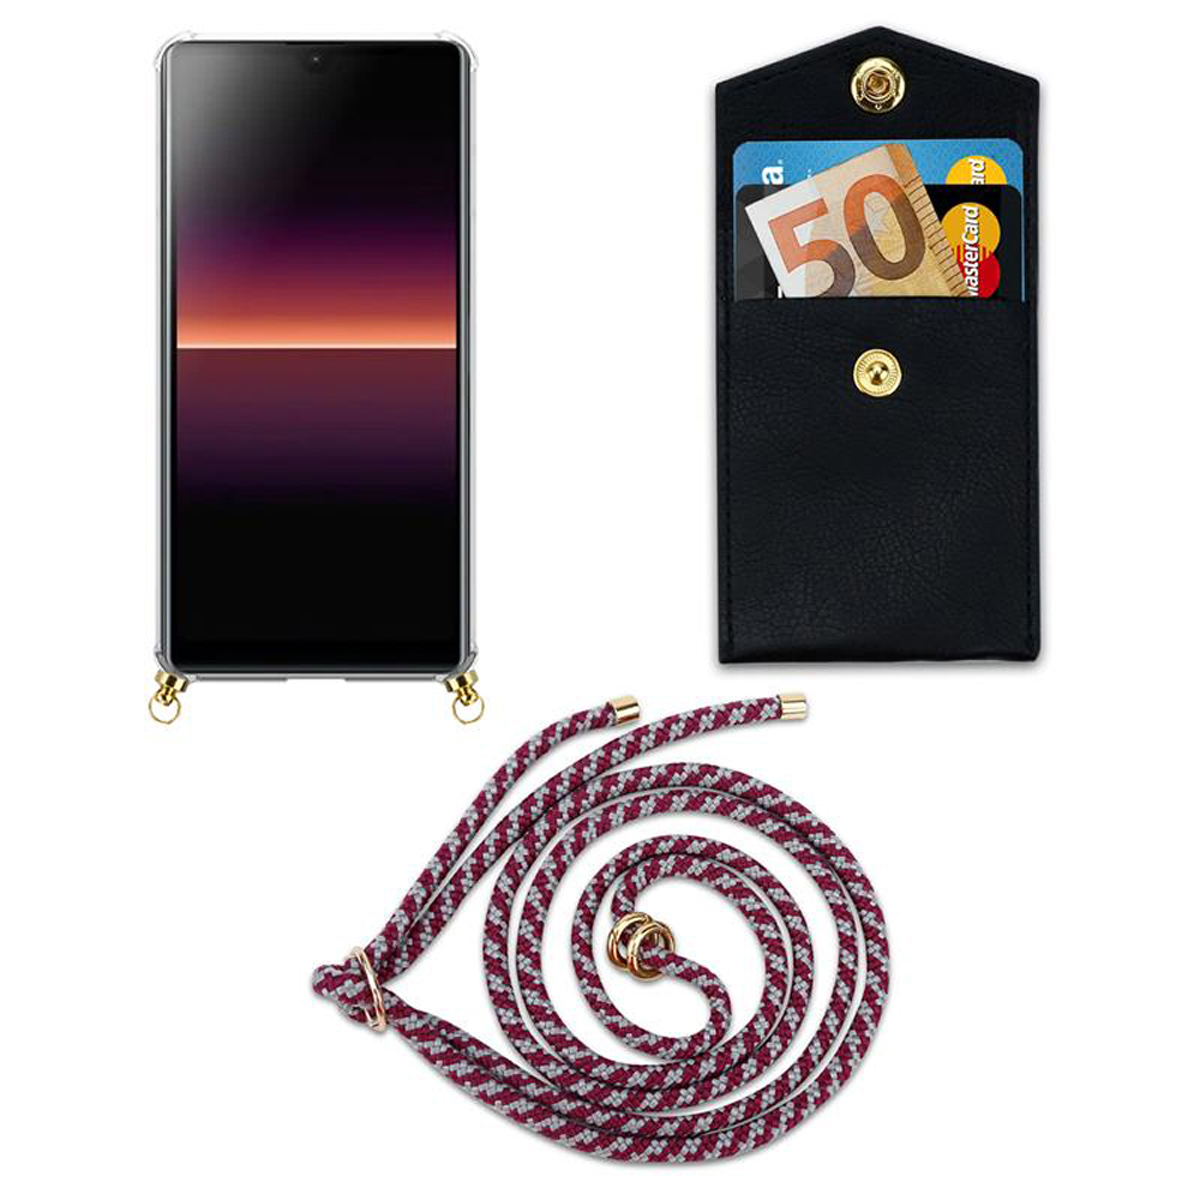 Gold Sony, L4, Xperia Band Backcover, Kette Kordel Hülle, mit abnehmbarer CADORABO Handy ROT WEIß Ringen, und